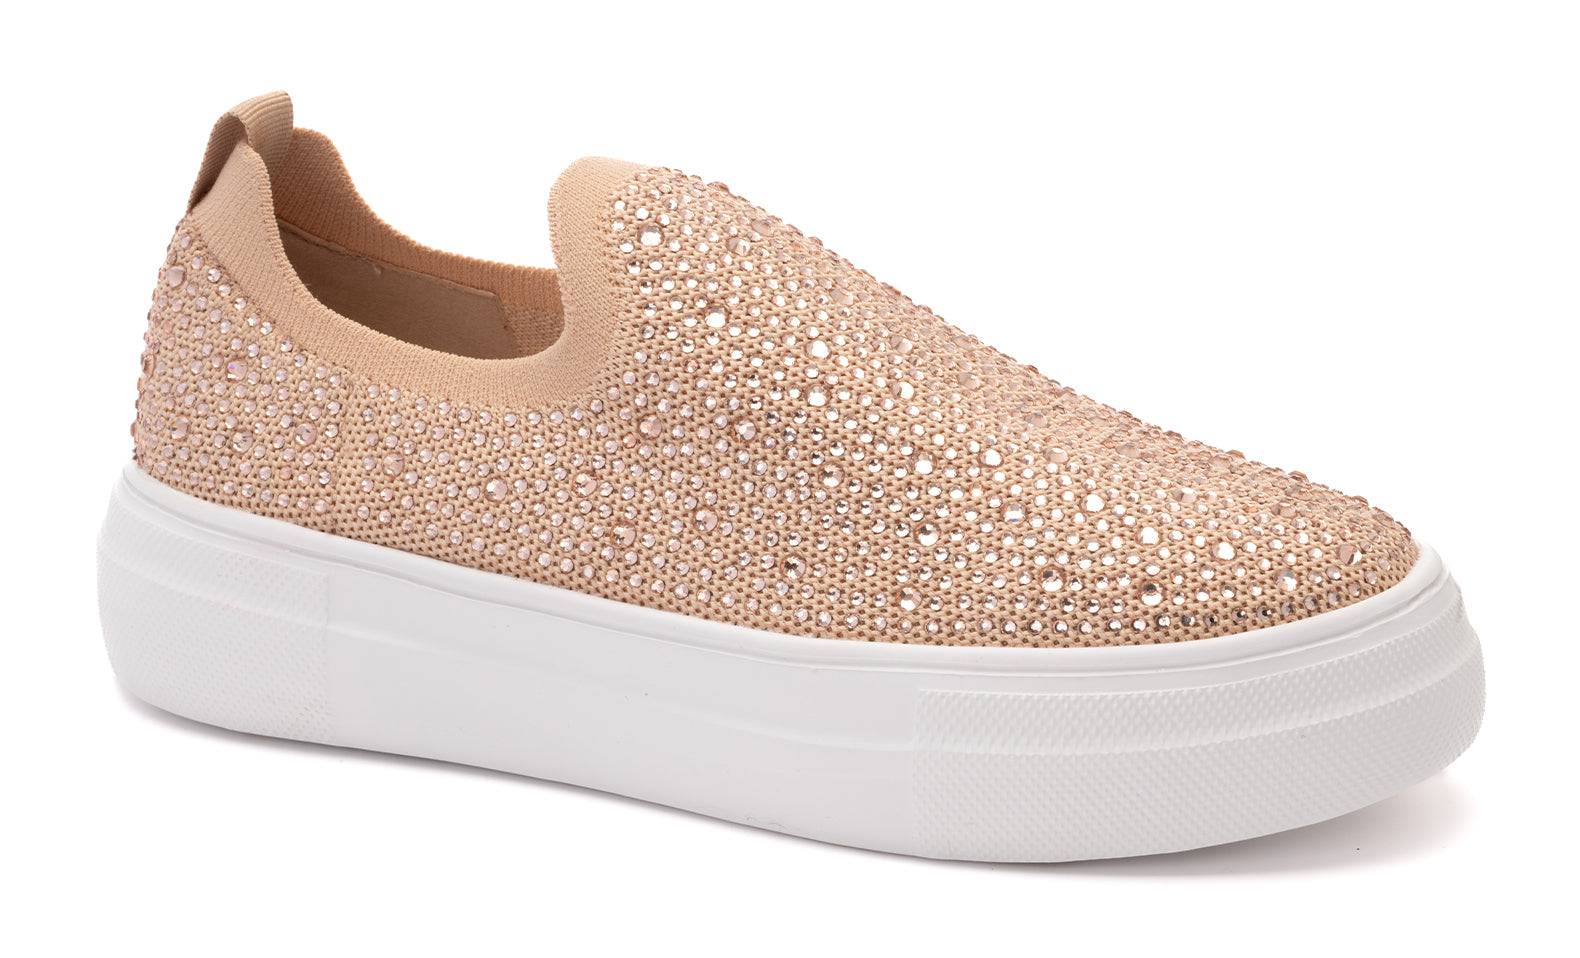 Swank blush crystals slide on corky shoes